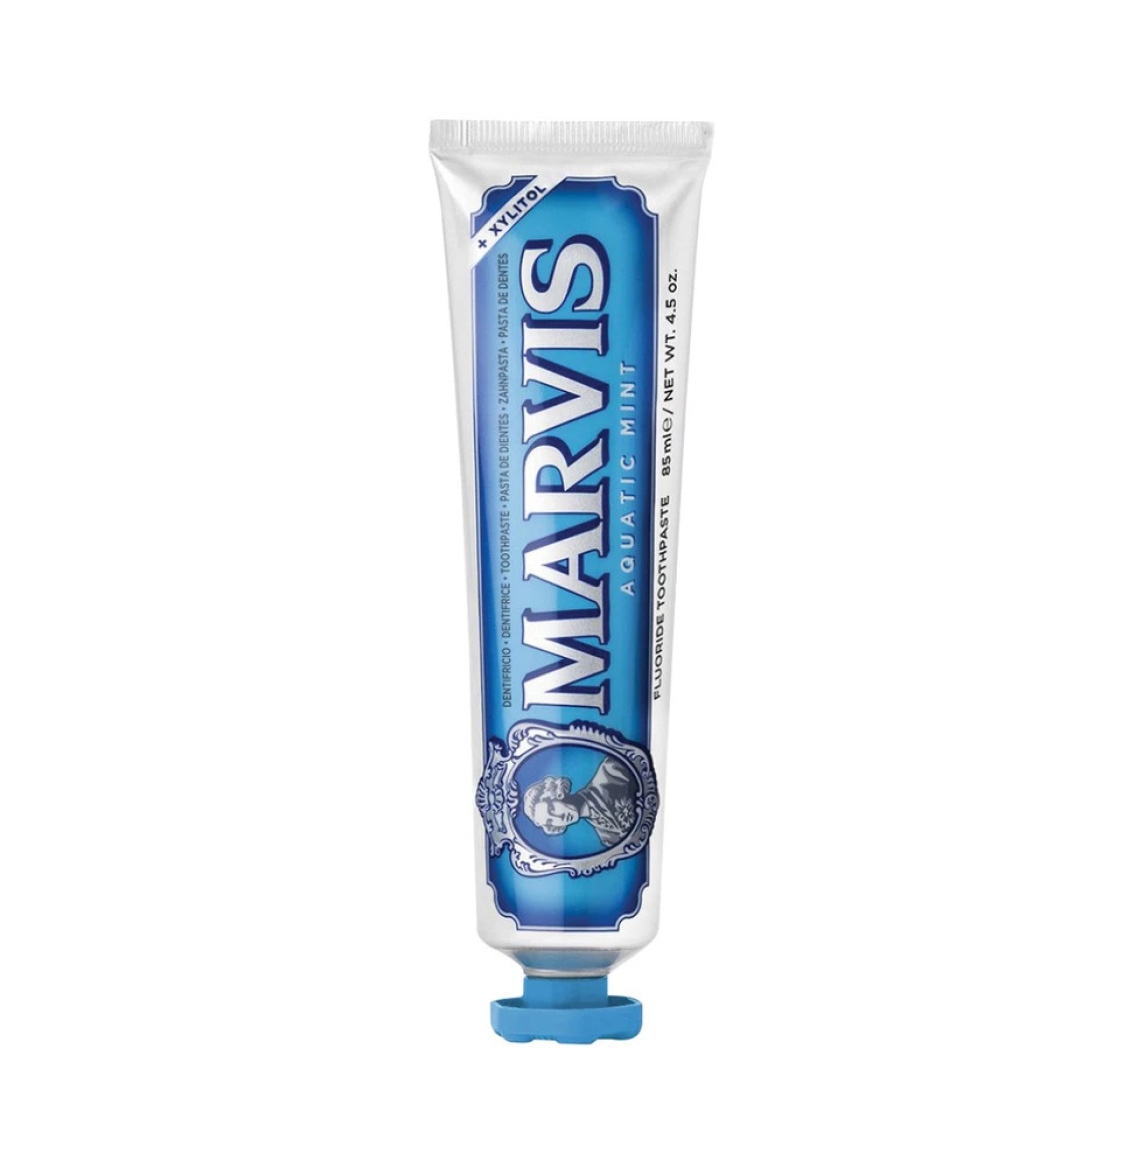 Marvis Aquatic Mint Toothpaste 85ml + Xylitol